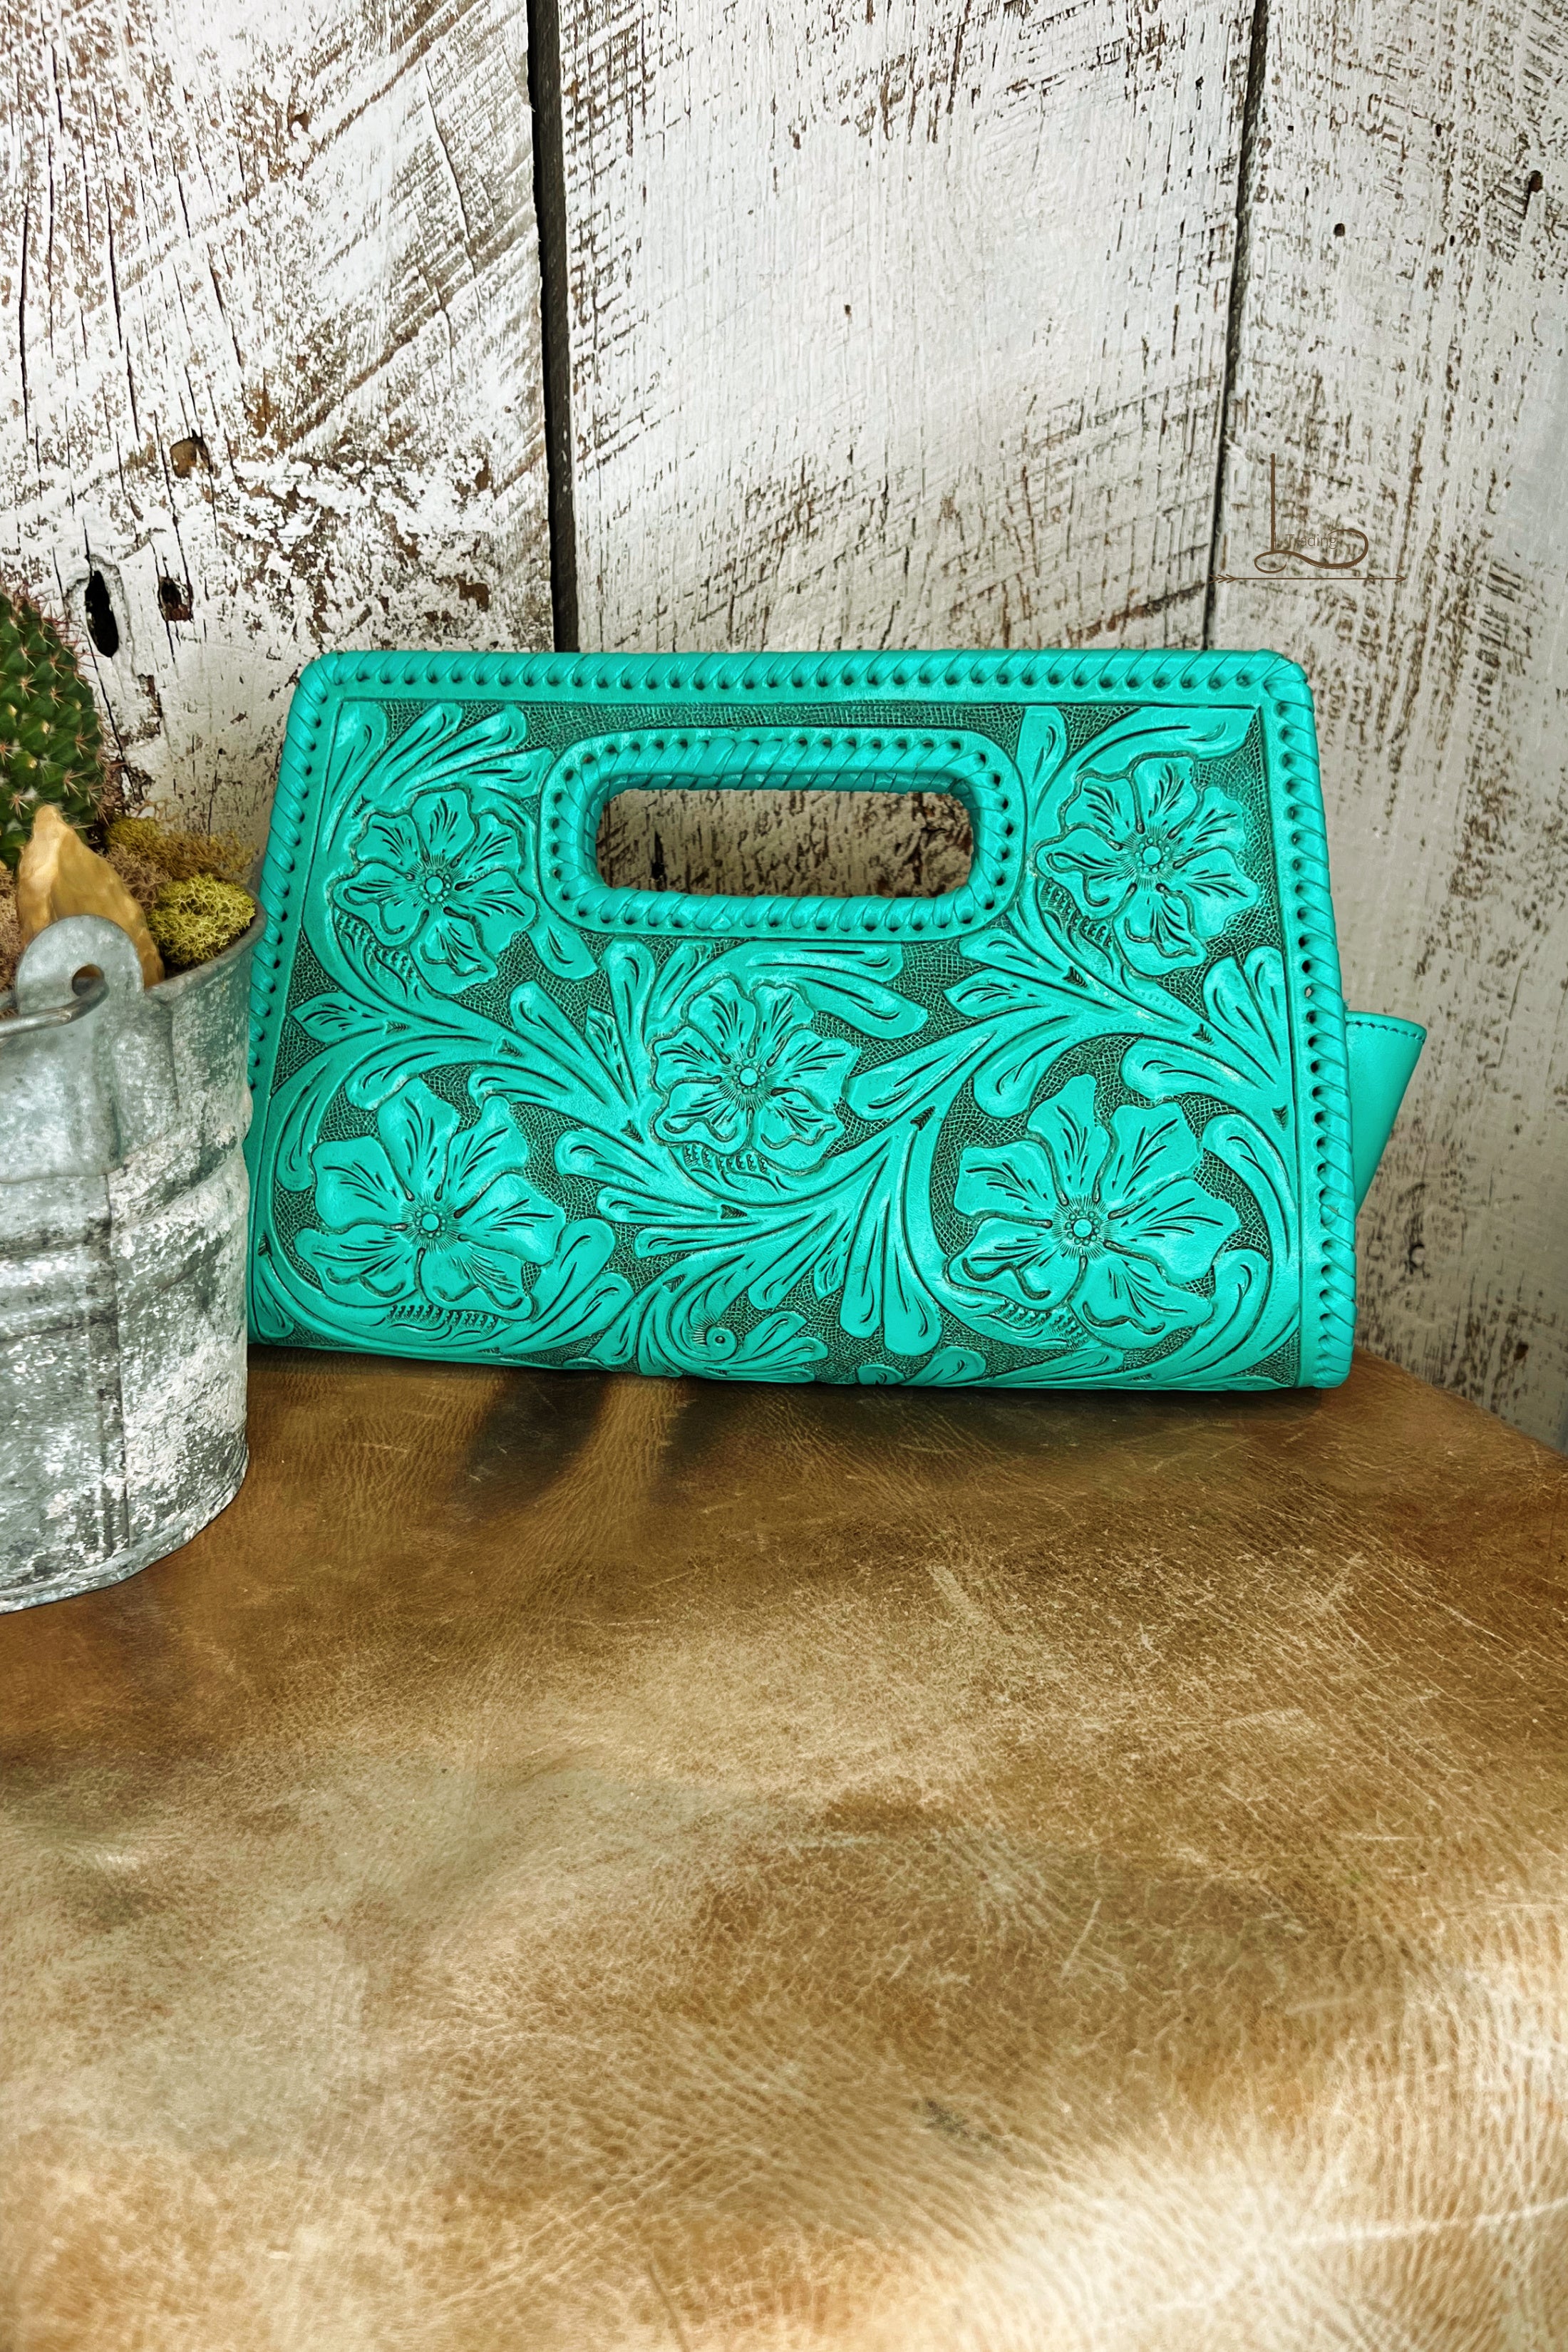 Buy Blue Velvet Evening Bag, Embroidered Floral Clutch, Turquoise Floral  Purse, Teal Floral Purse, Zardozi Purse, OOAK Statement Clutch Online in  India - Etsy